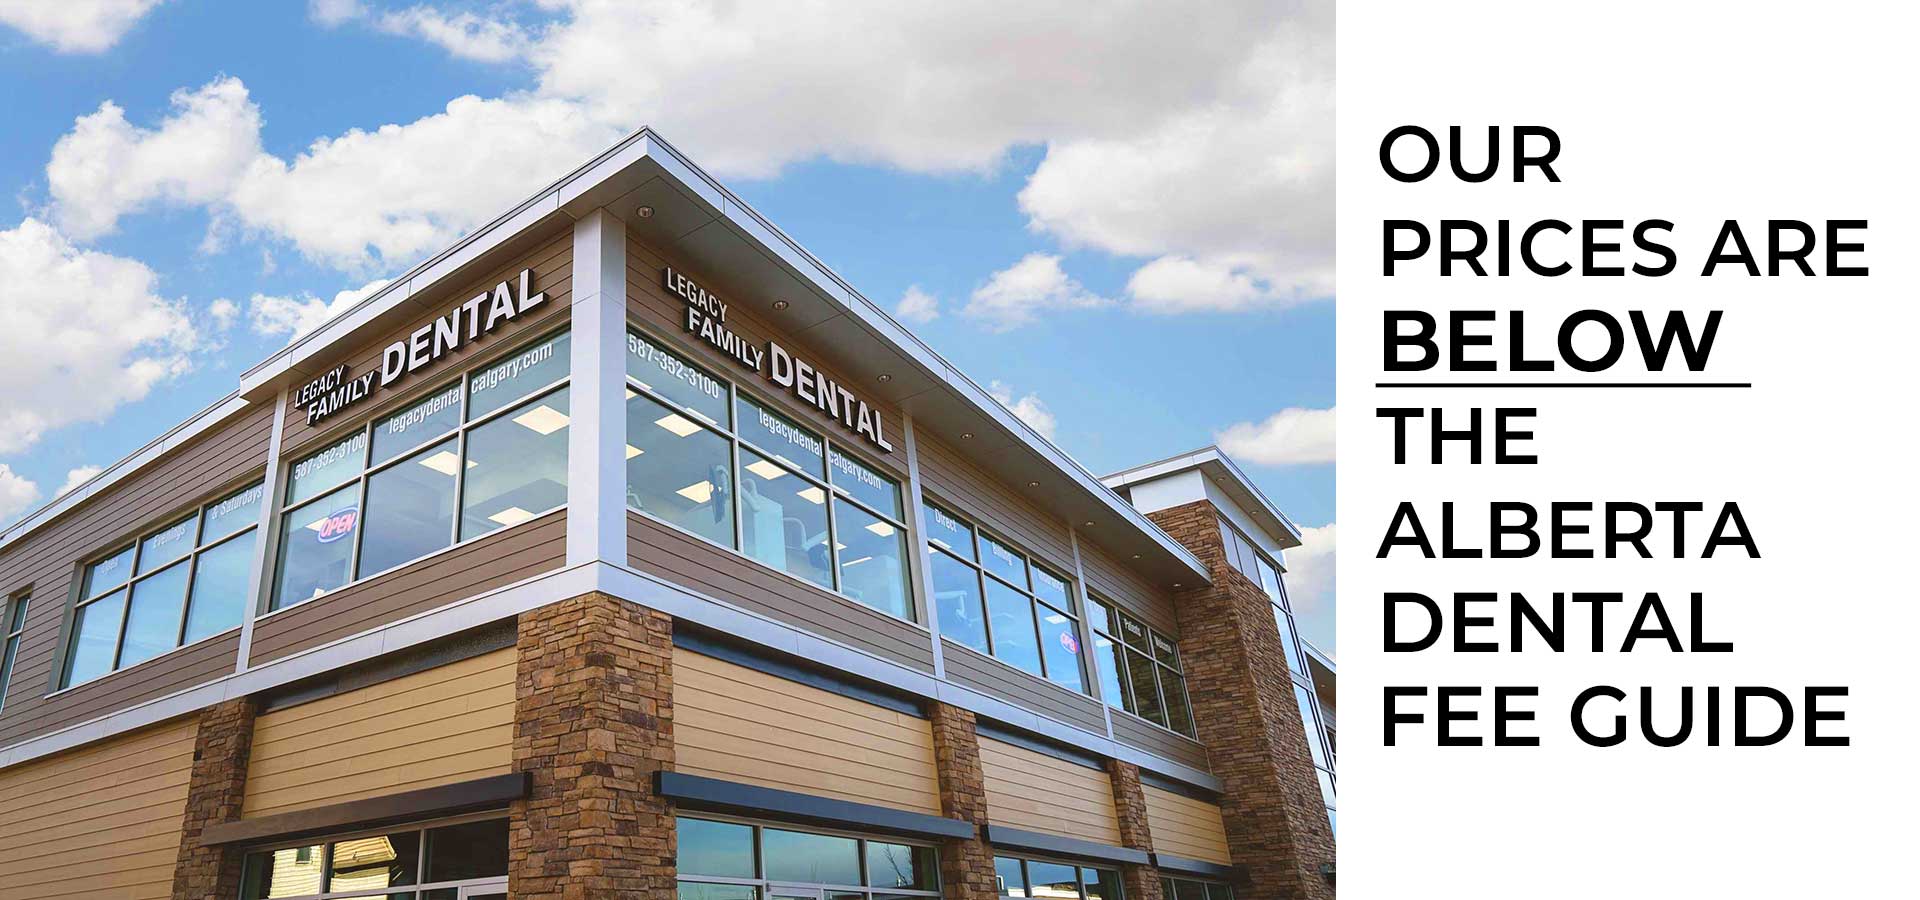 We Bill Below Dental Fee Guide South Calgary Dental & Orthodontics | General and Family Dentist and Orthodontist | SE Calgary